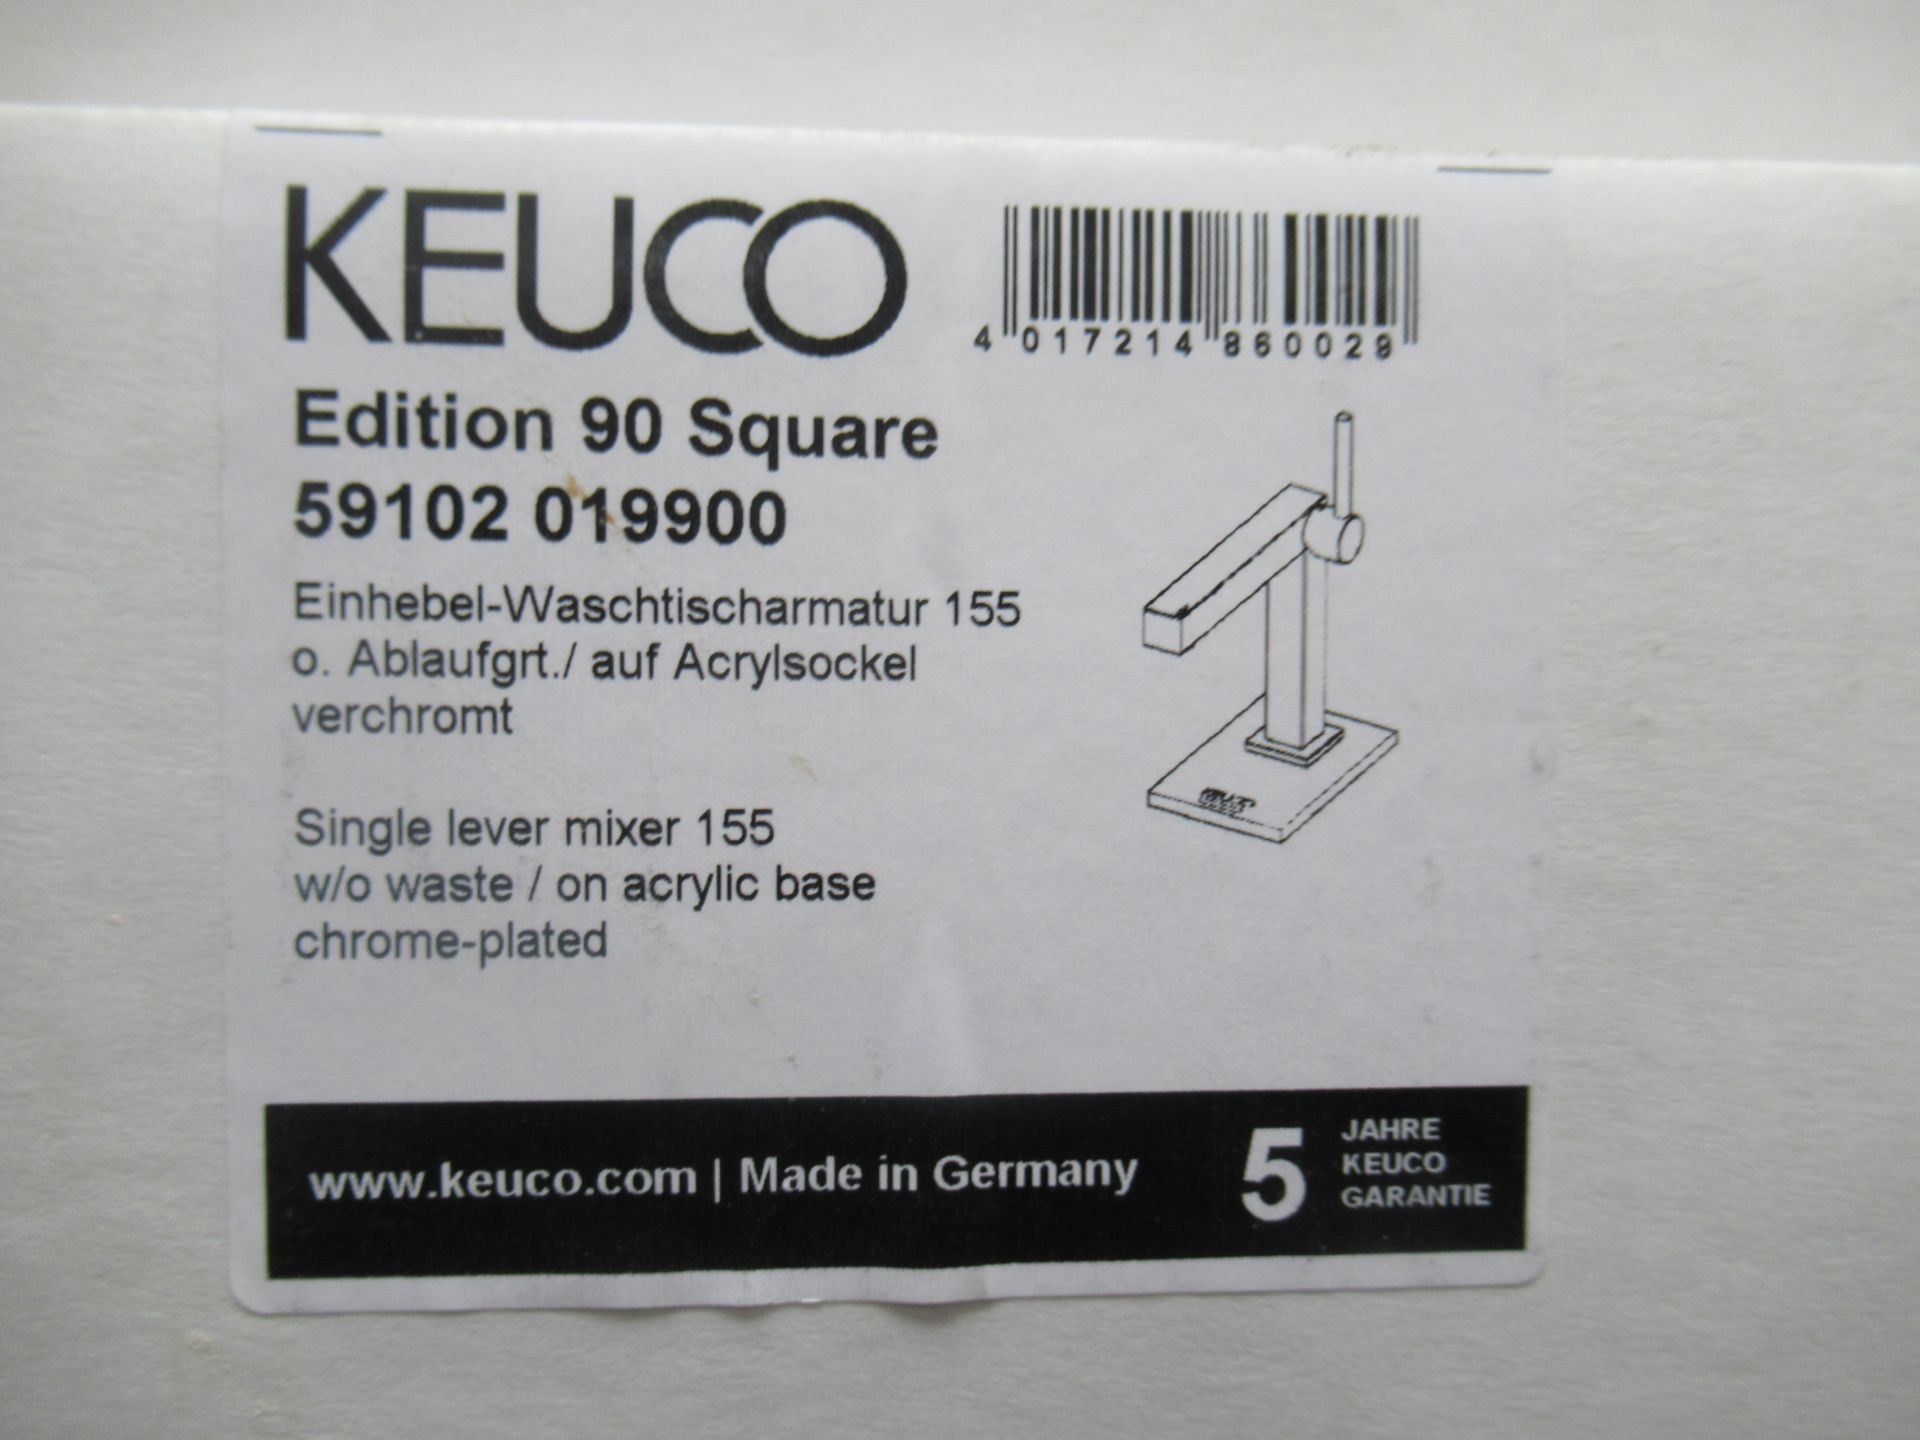 2 x Keuco Edition 90 Square- Single Lever Mixer 155-Tap, Chrome Plated, P/N 59102-019900 - Image 2 of 3